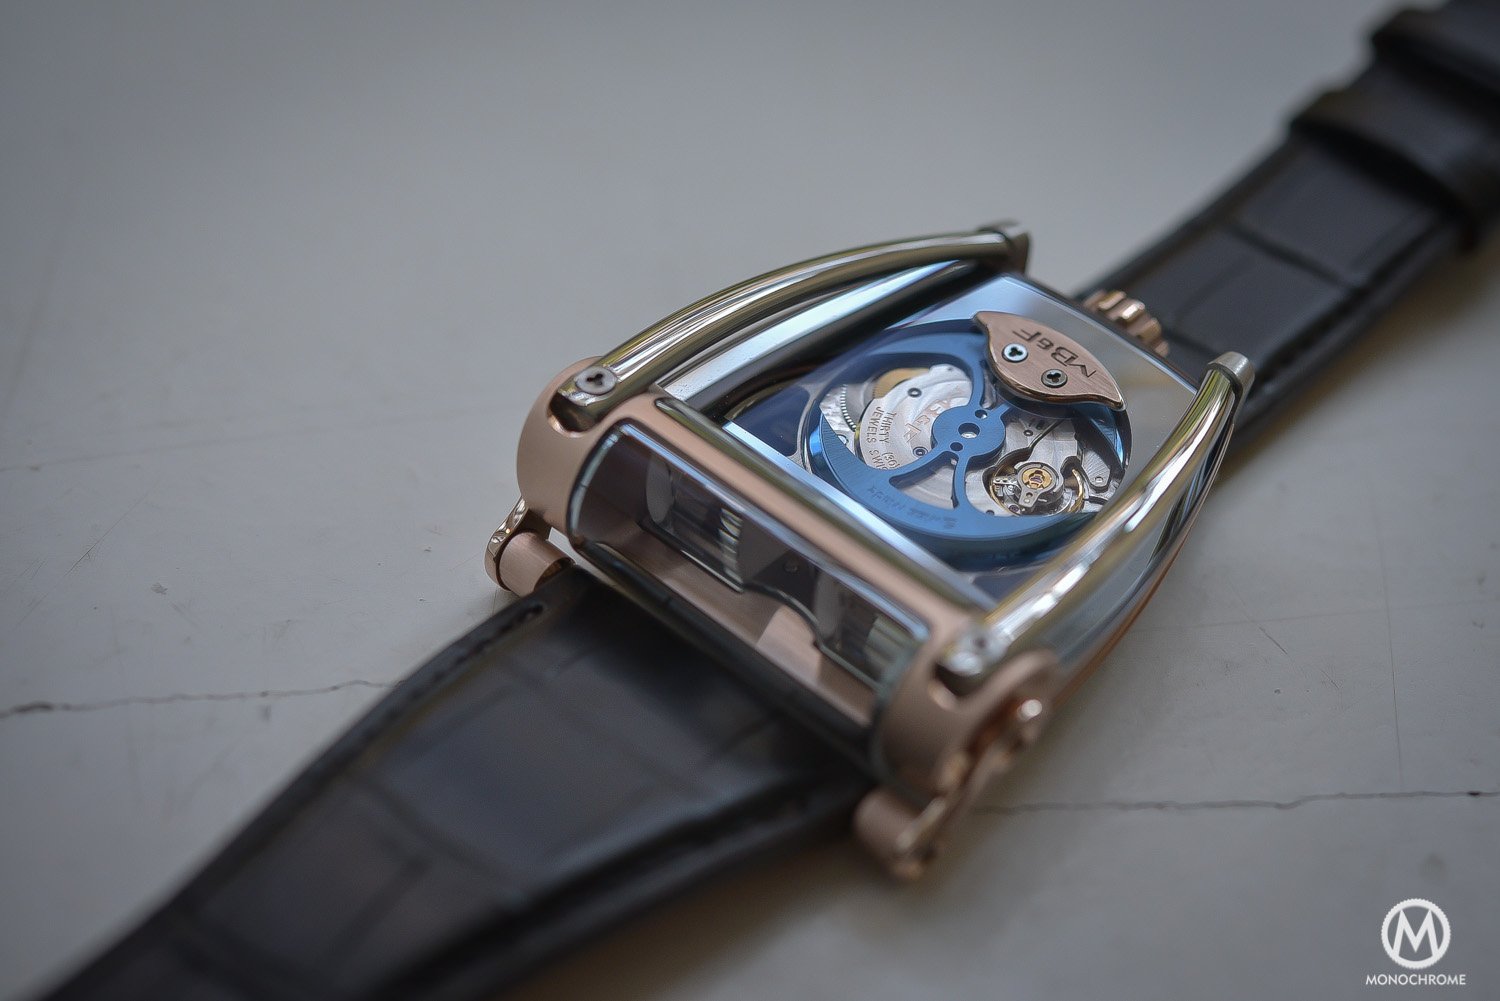 MB&F HM8 Can-Am